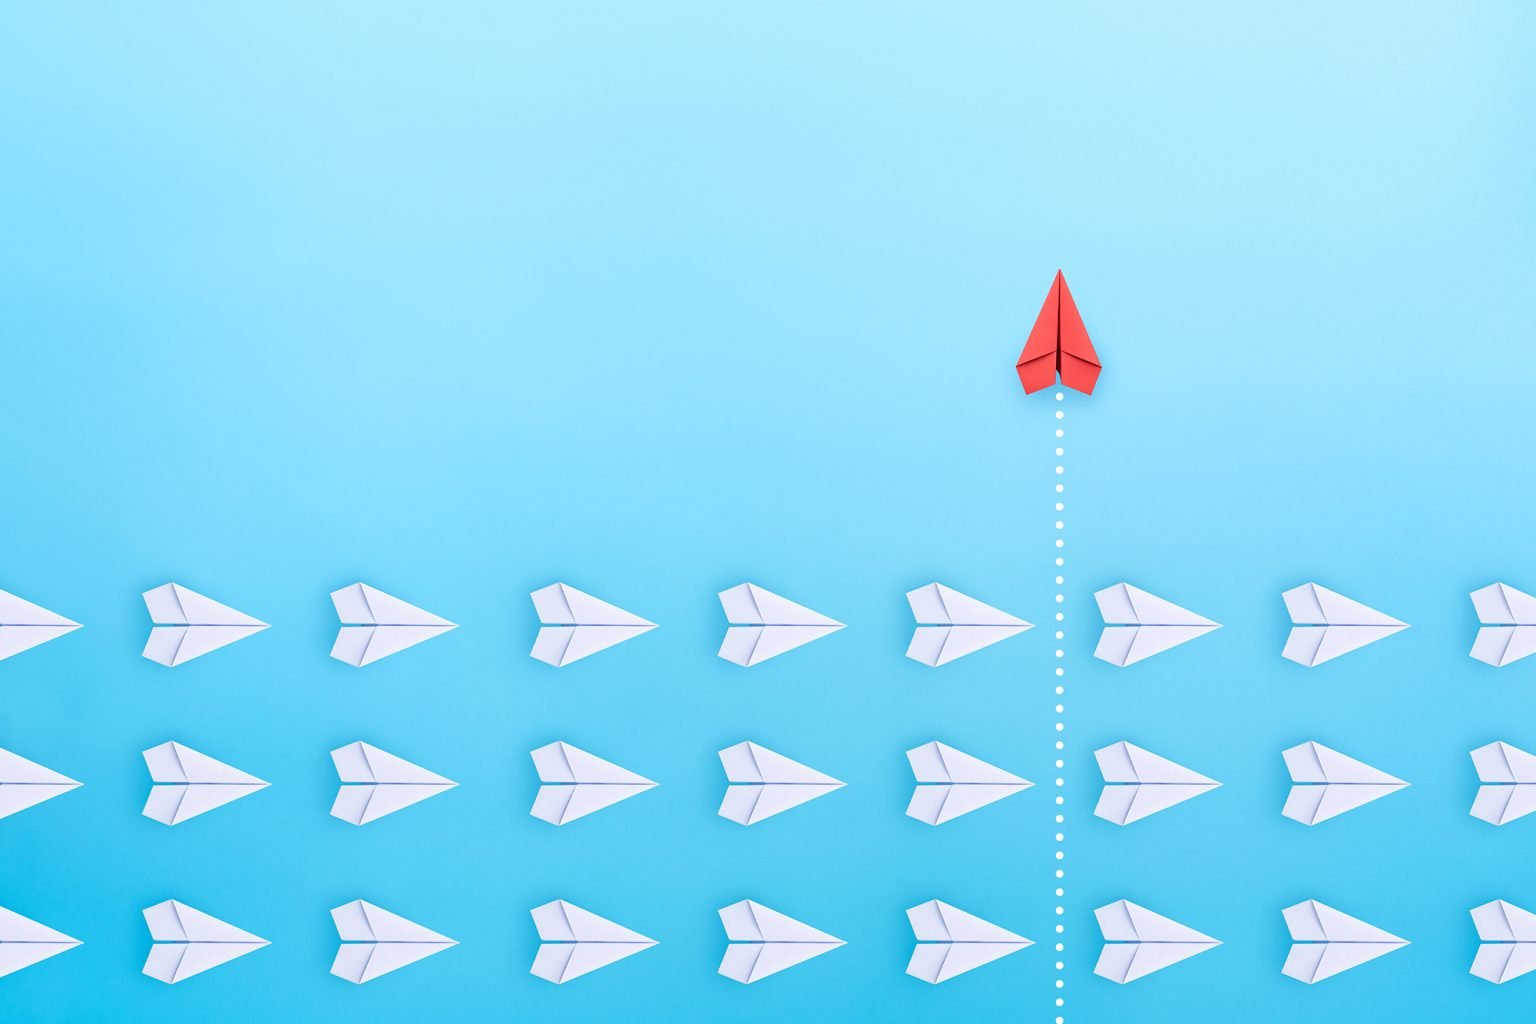 Group of white paper plane in one direction and one red paper plane pointing in different way on blue background